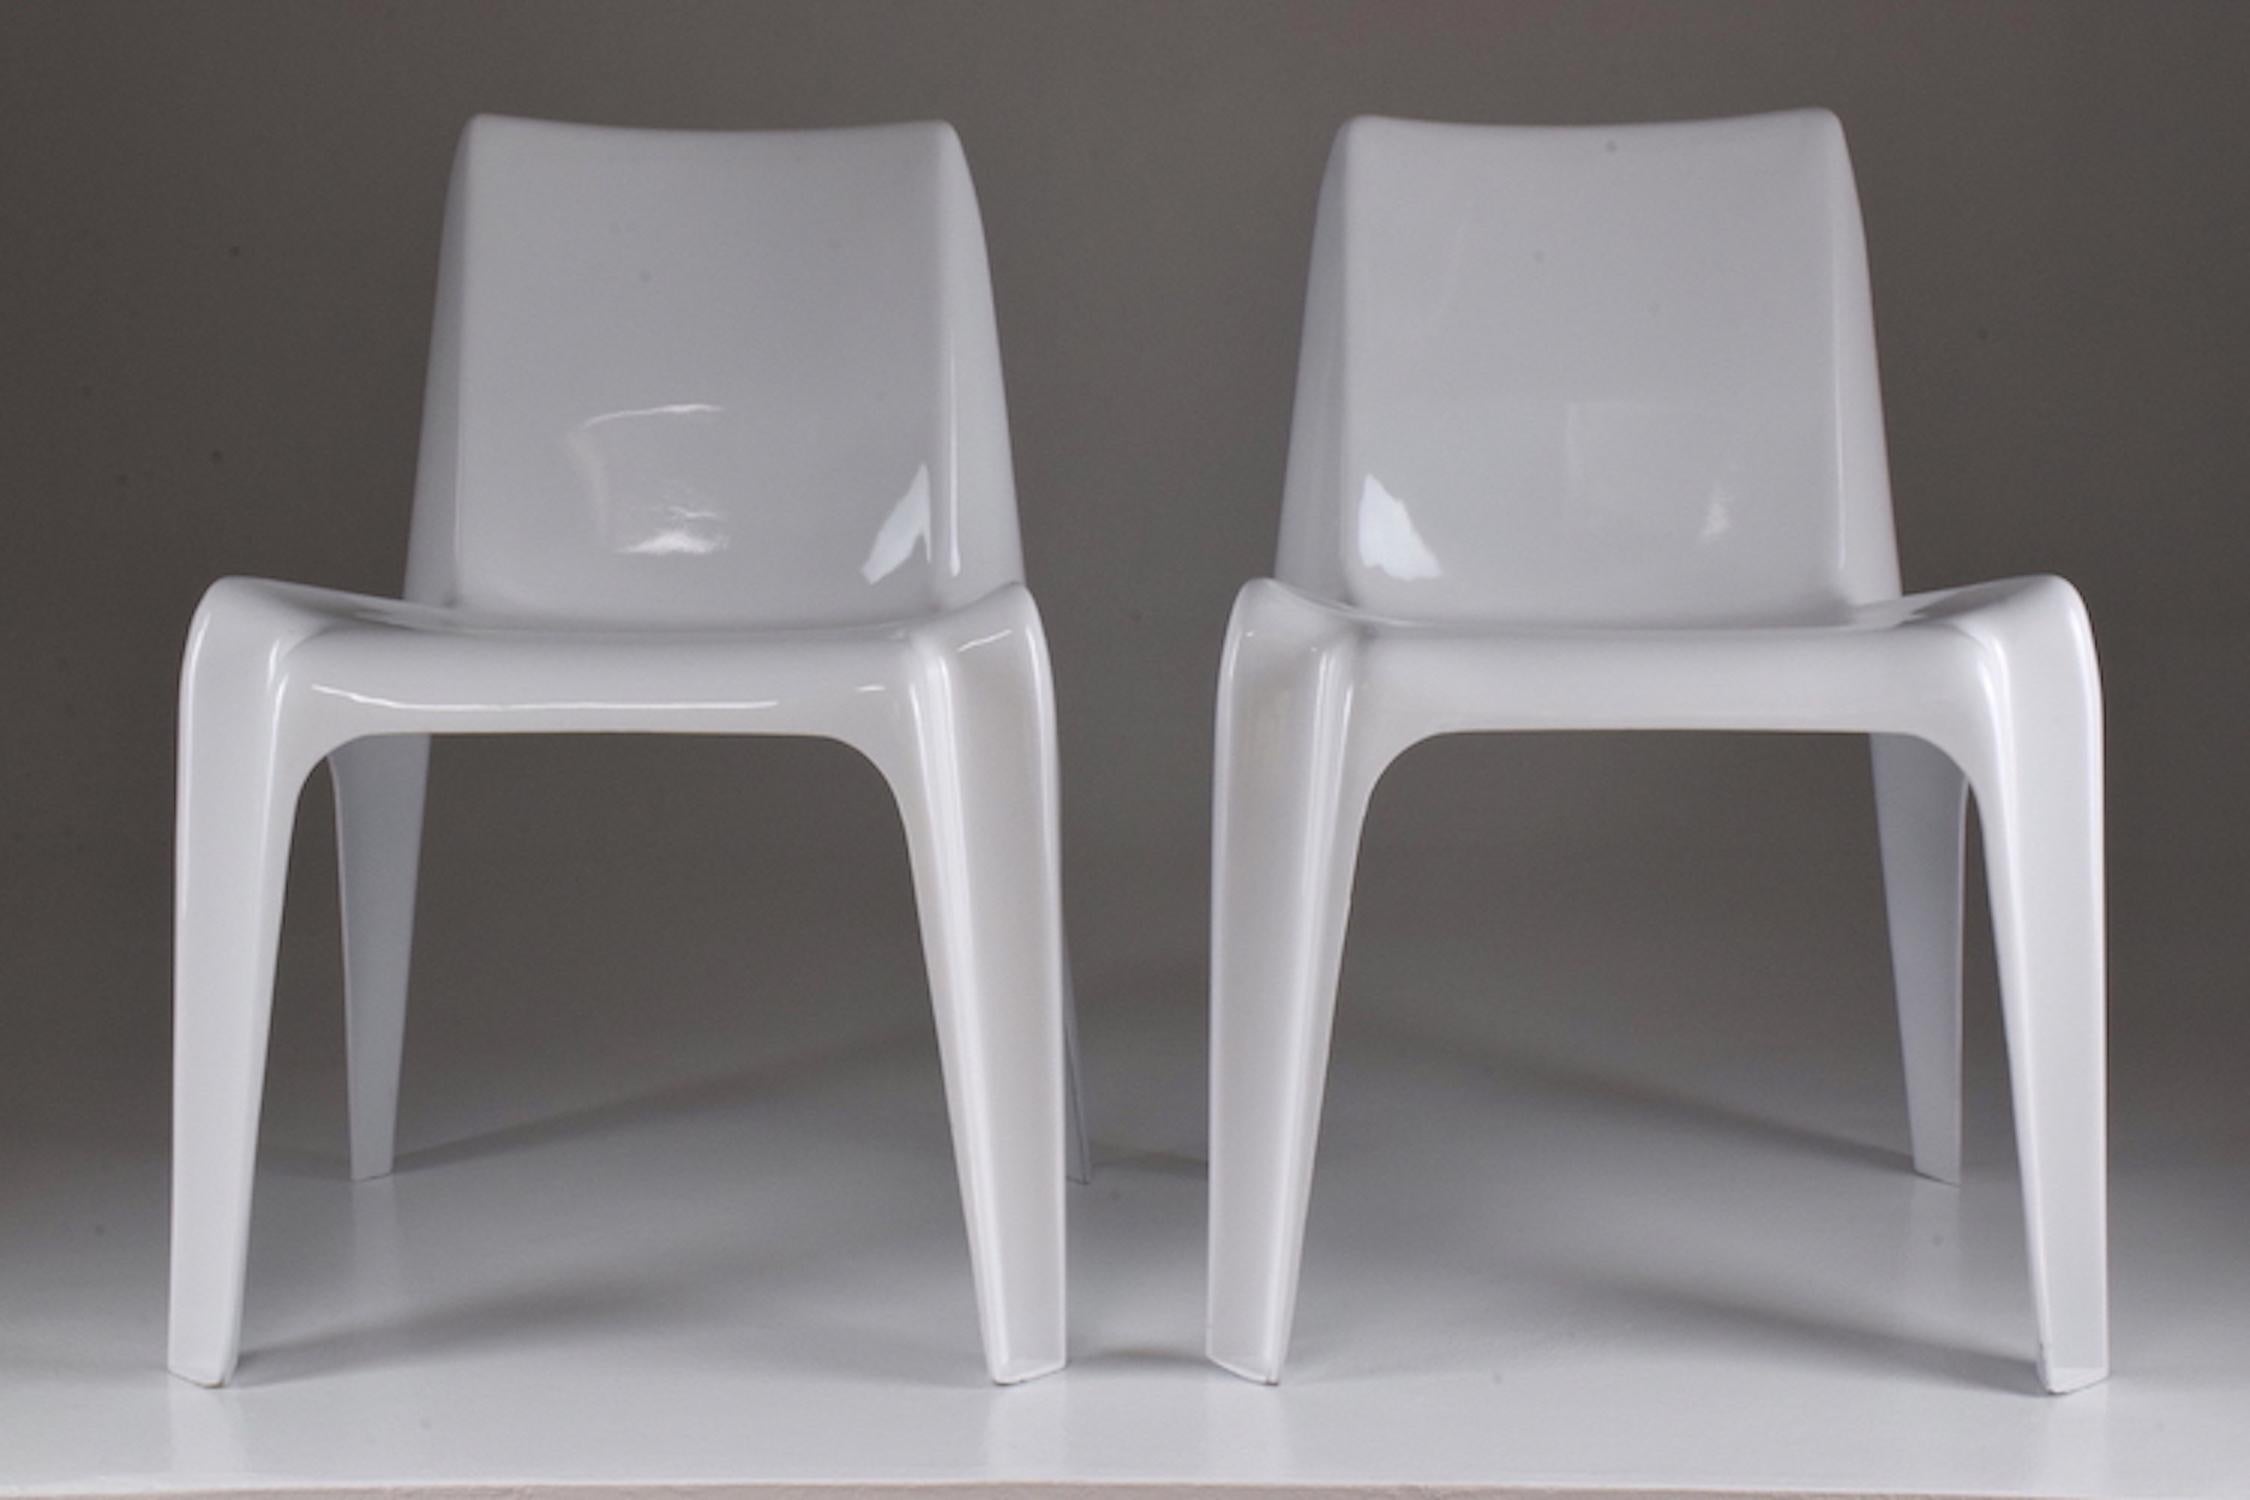 Pair of stackable Bofinger chairs by Helmut Bätzner produced circa 1966 for the Badisches Staatstheater of Karlsruhe.
The first one-piece mass-produced plastic chair.